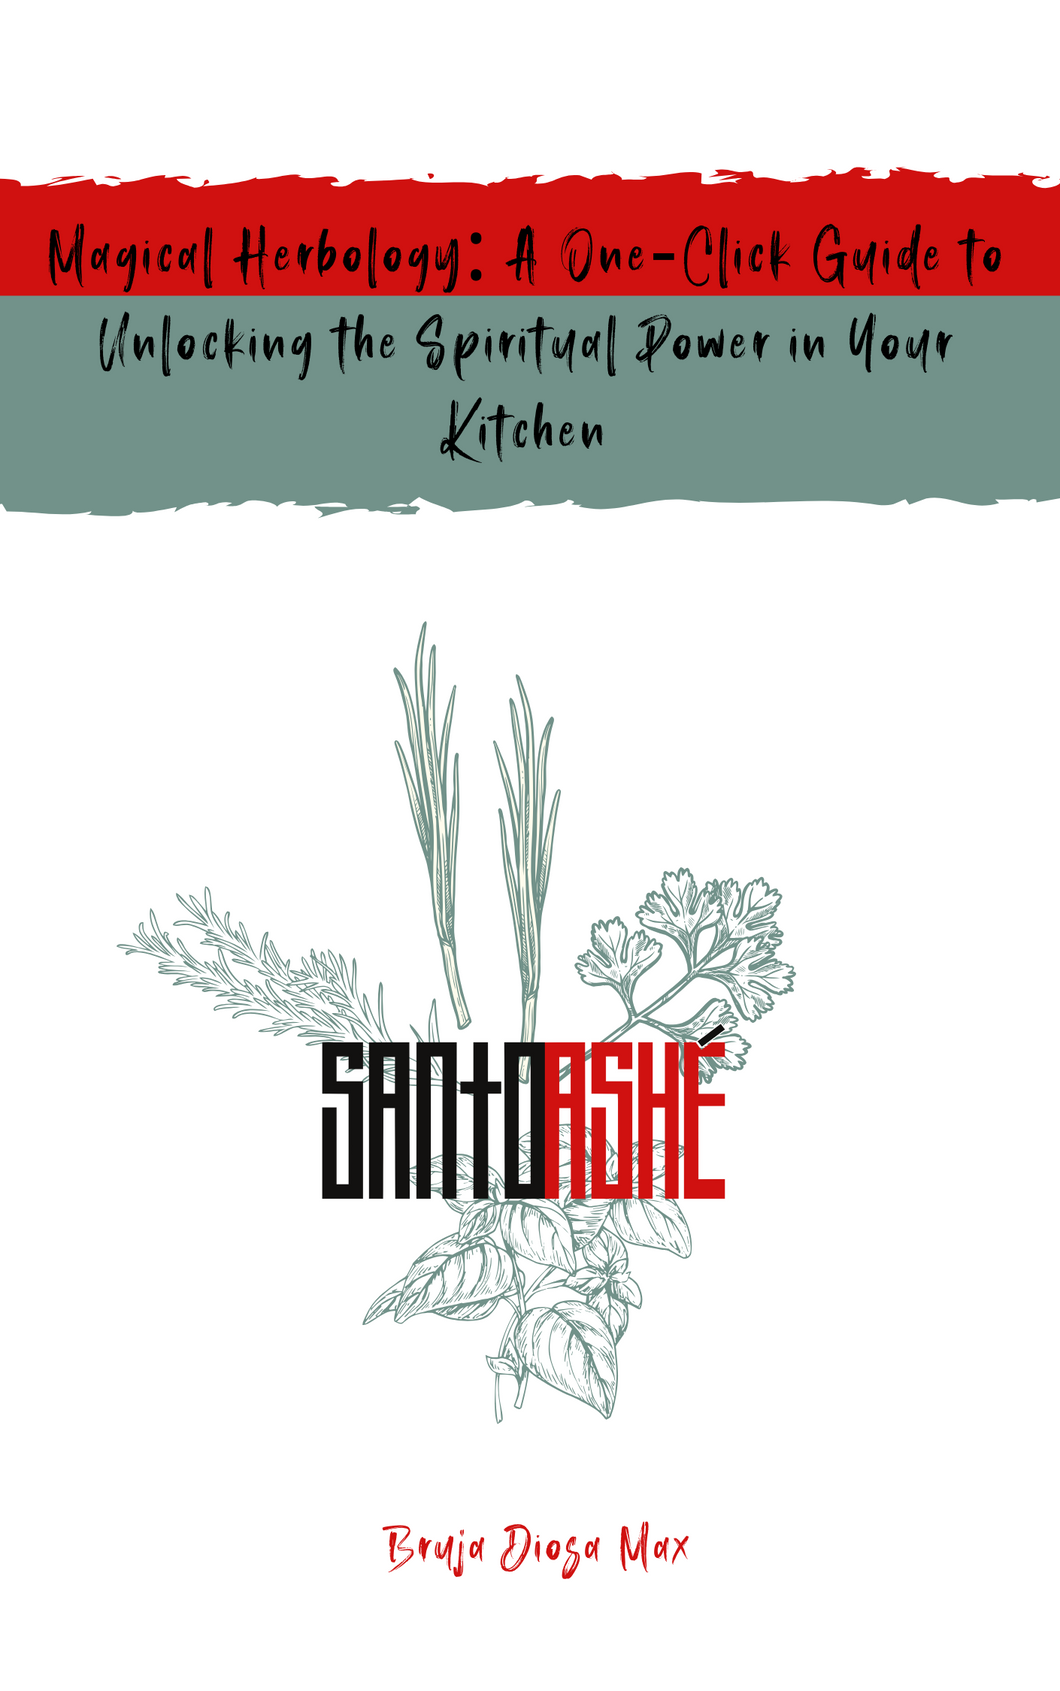 Magical Herbology: A One-Click Guide to unlocking the spiritual power in your kitchen e-book